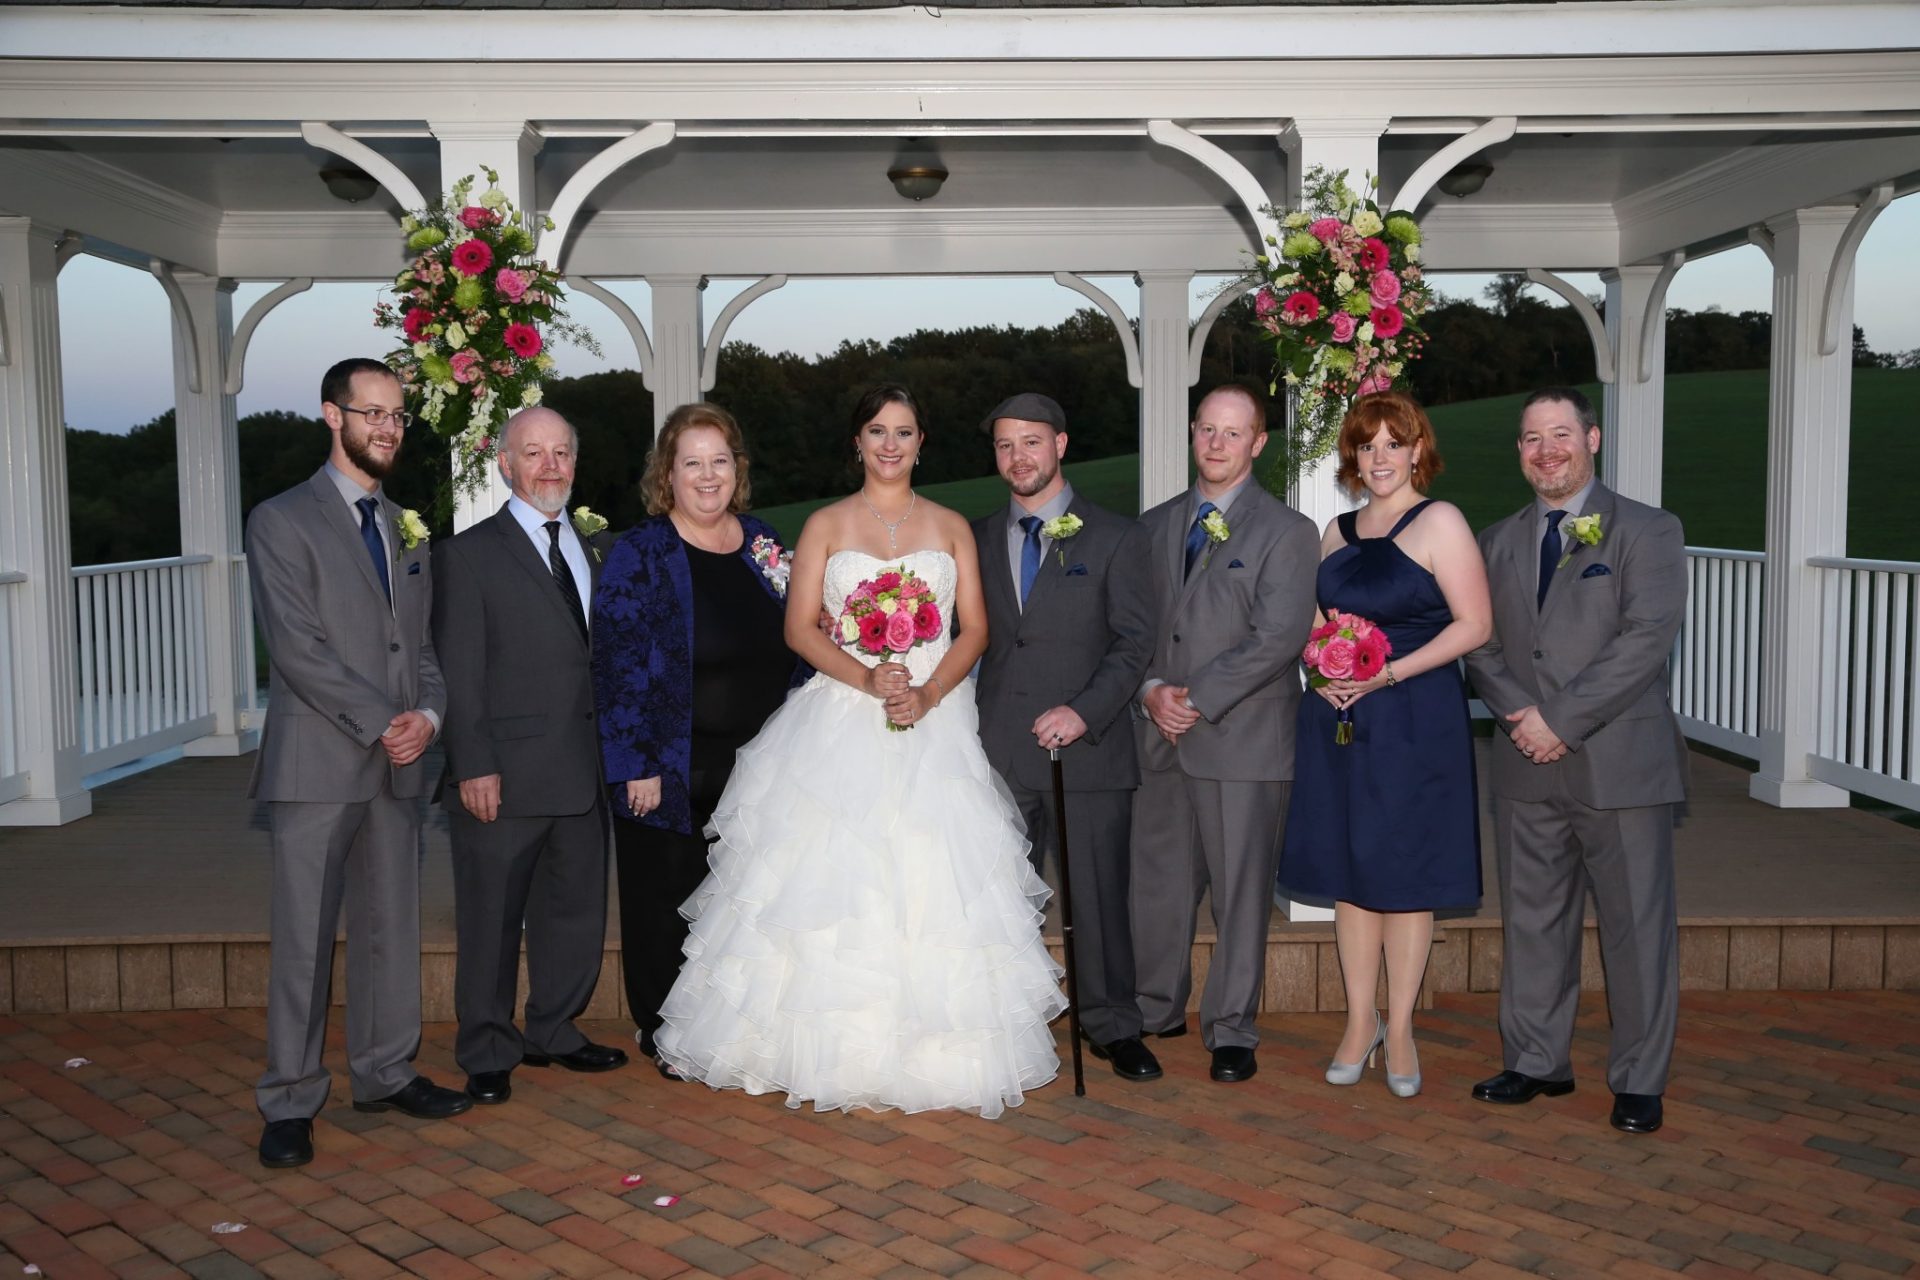 Wedding party on brick patio in front of wedding pavilion